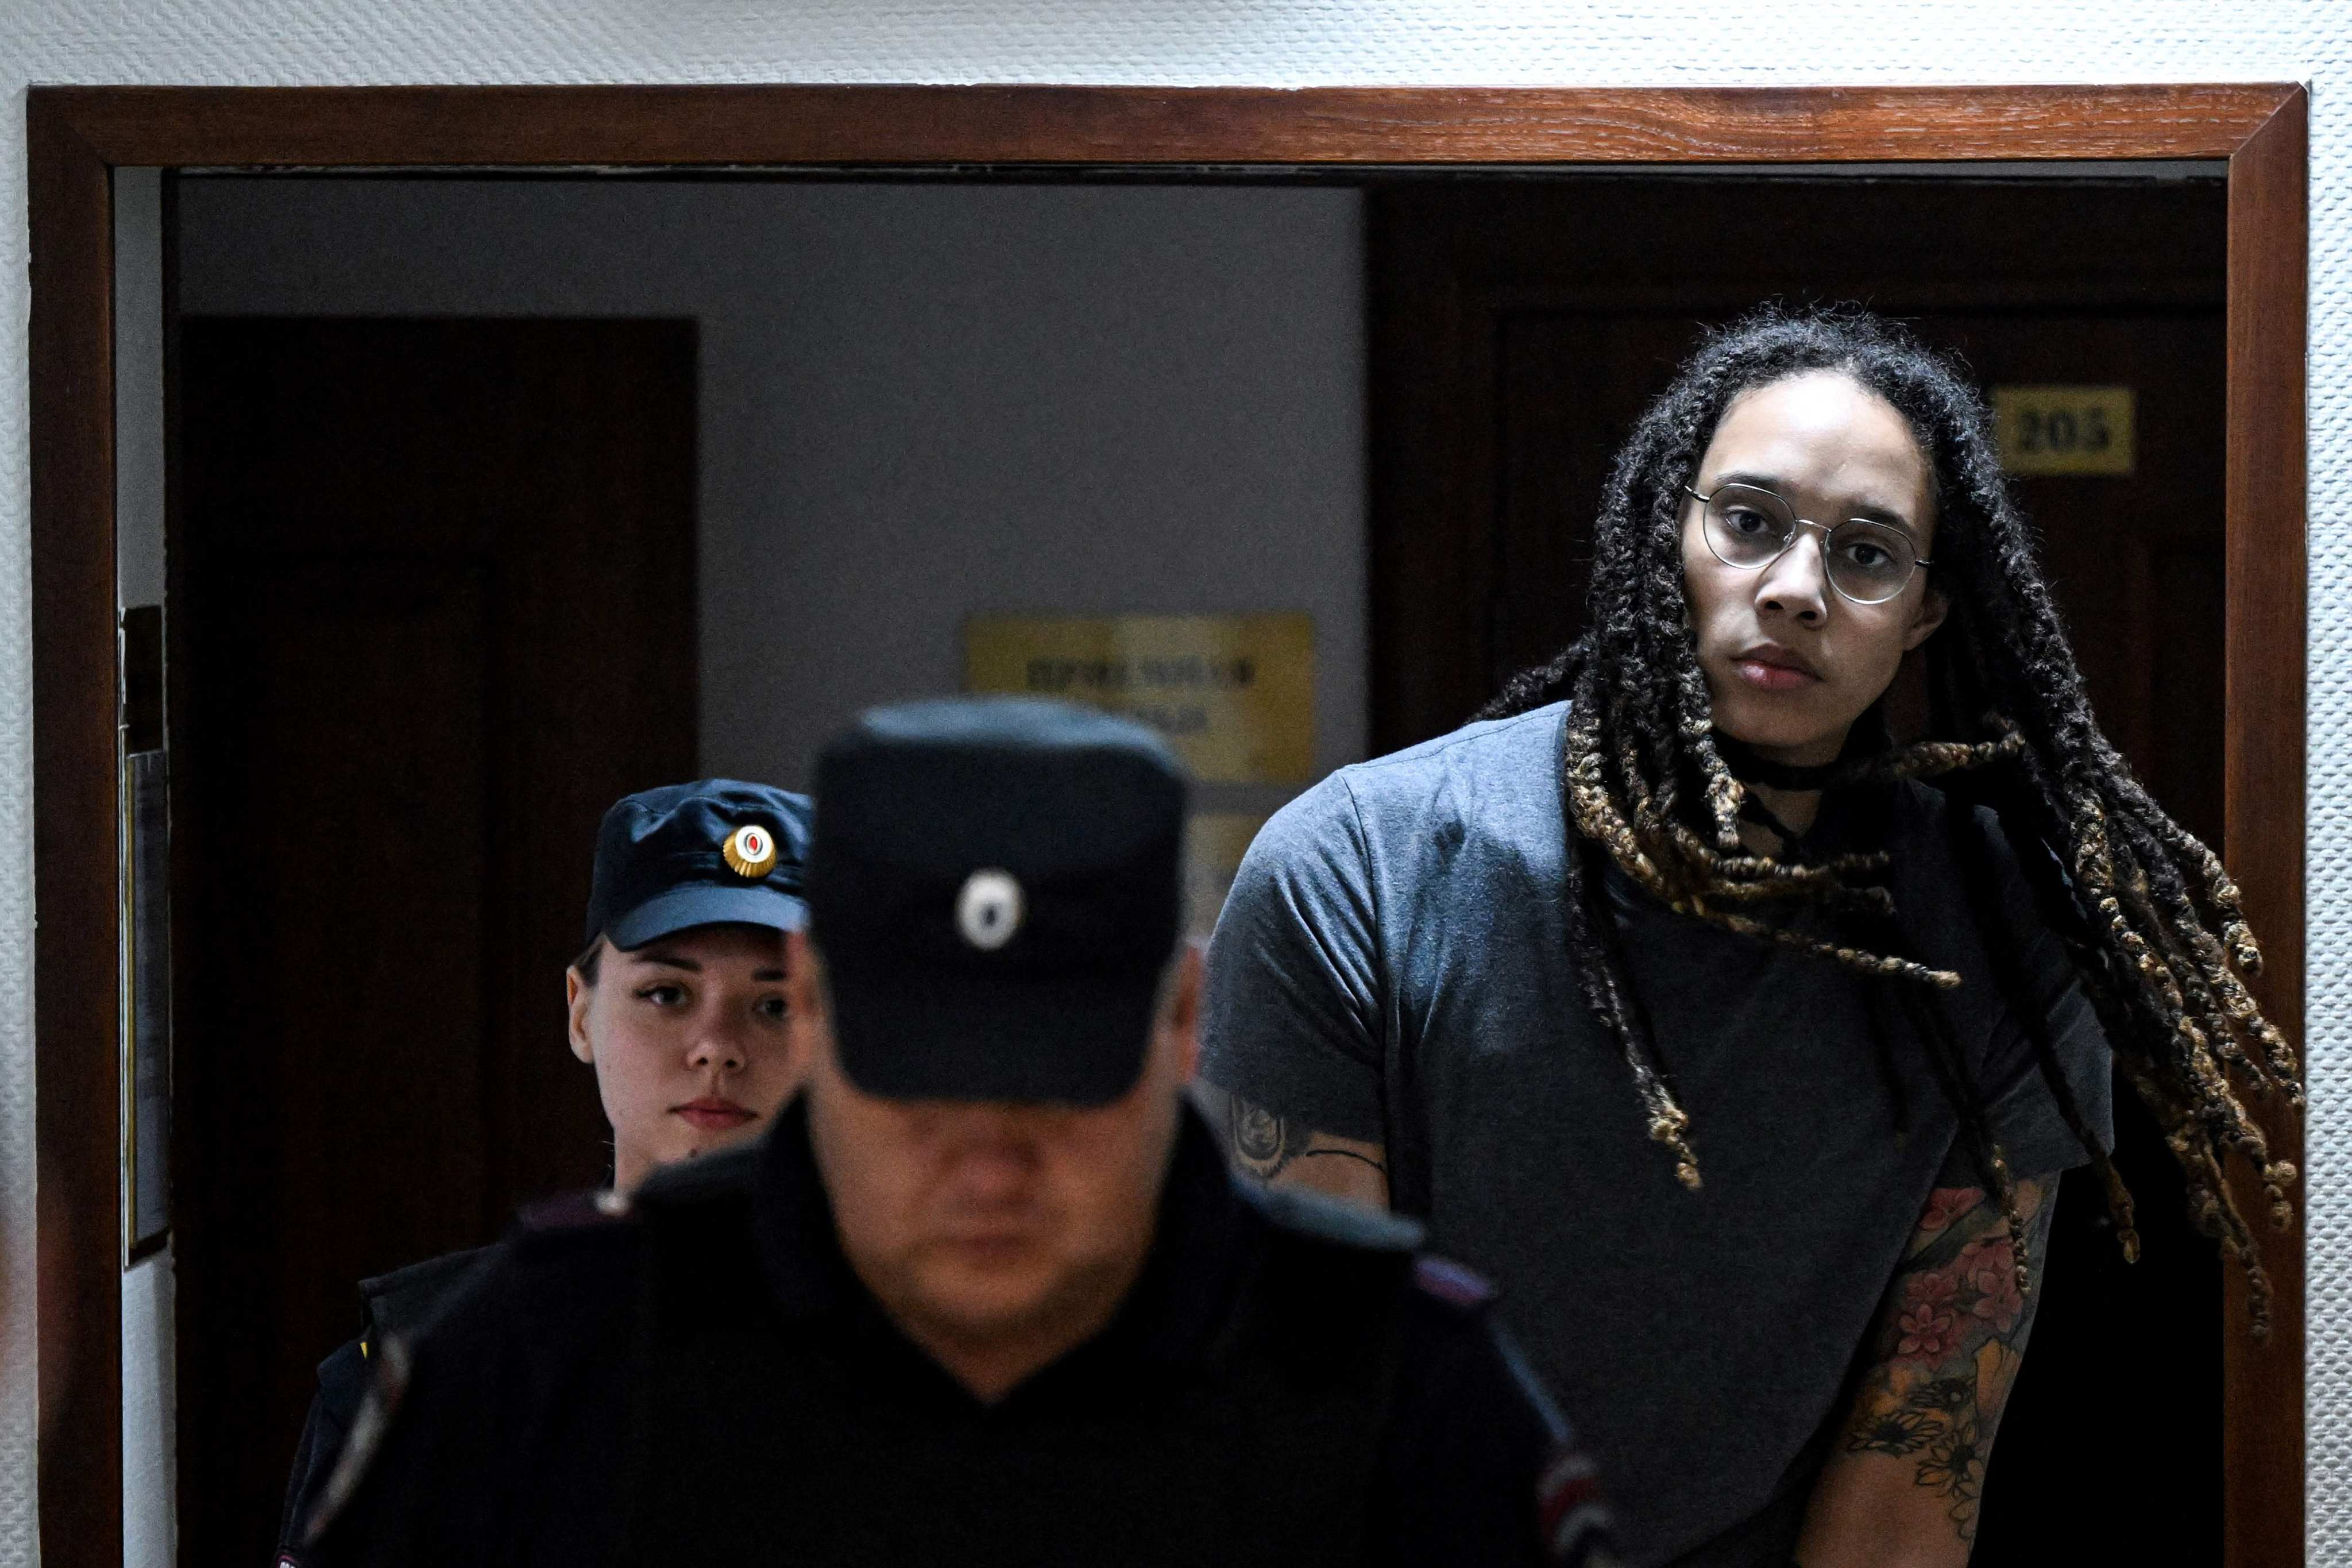 WNBA player Brittney Griner has told her wife she is afraid of being forgotten by the US. Photo: AFP